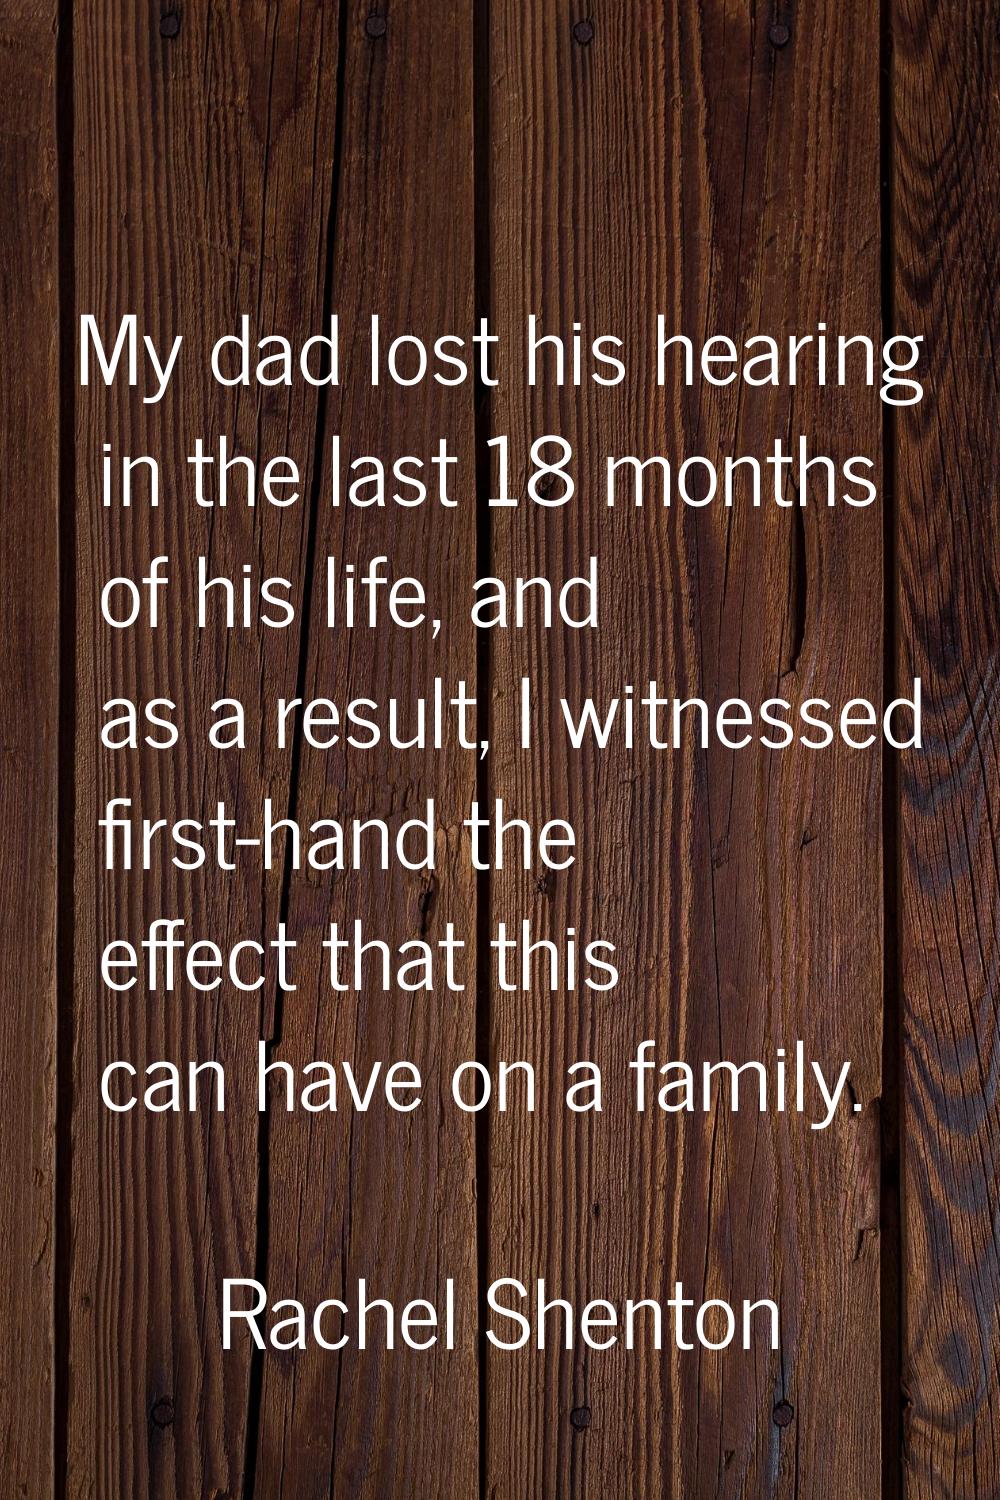 My dad lost his hearing in the last 18 months of his life, and as a result, I witnessed first-hand 